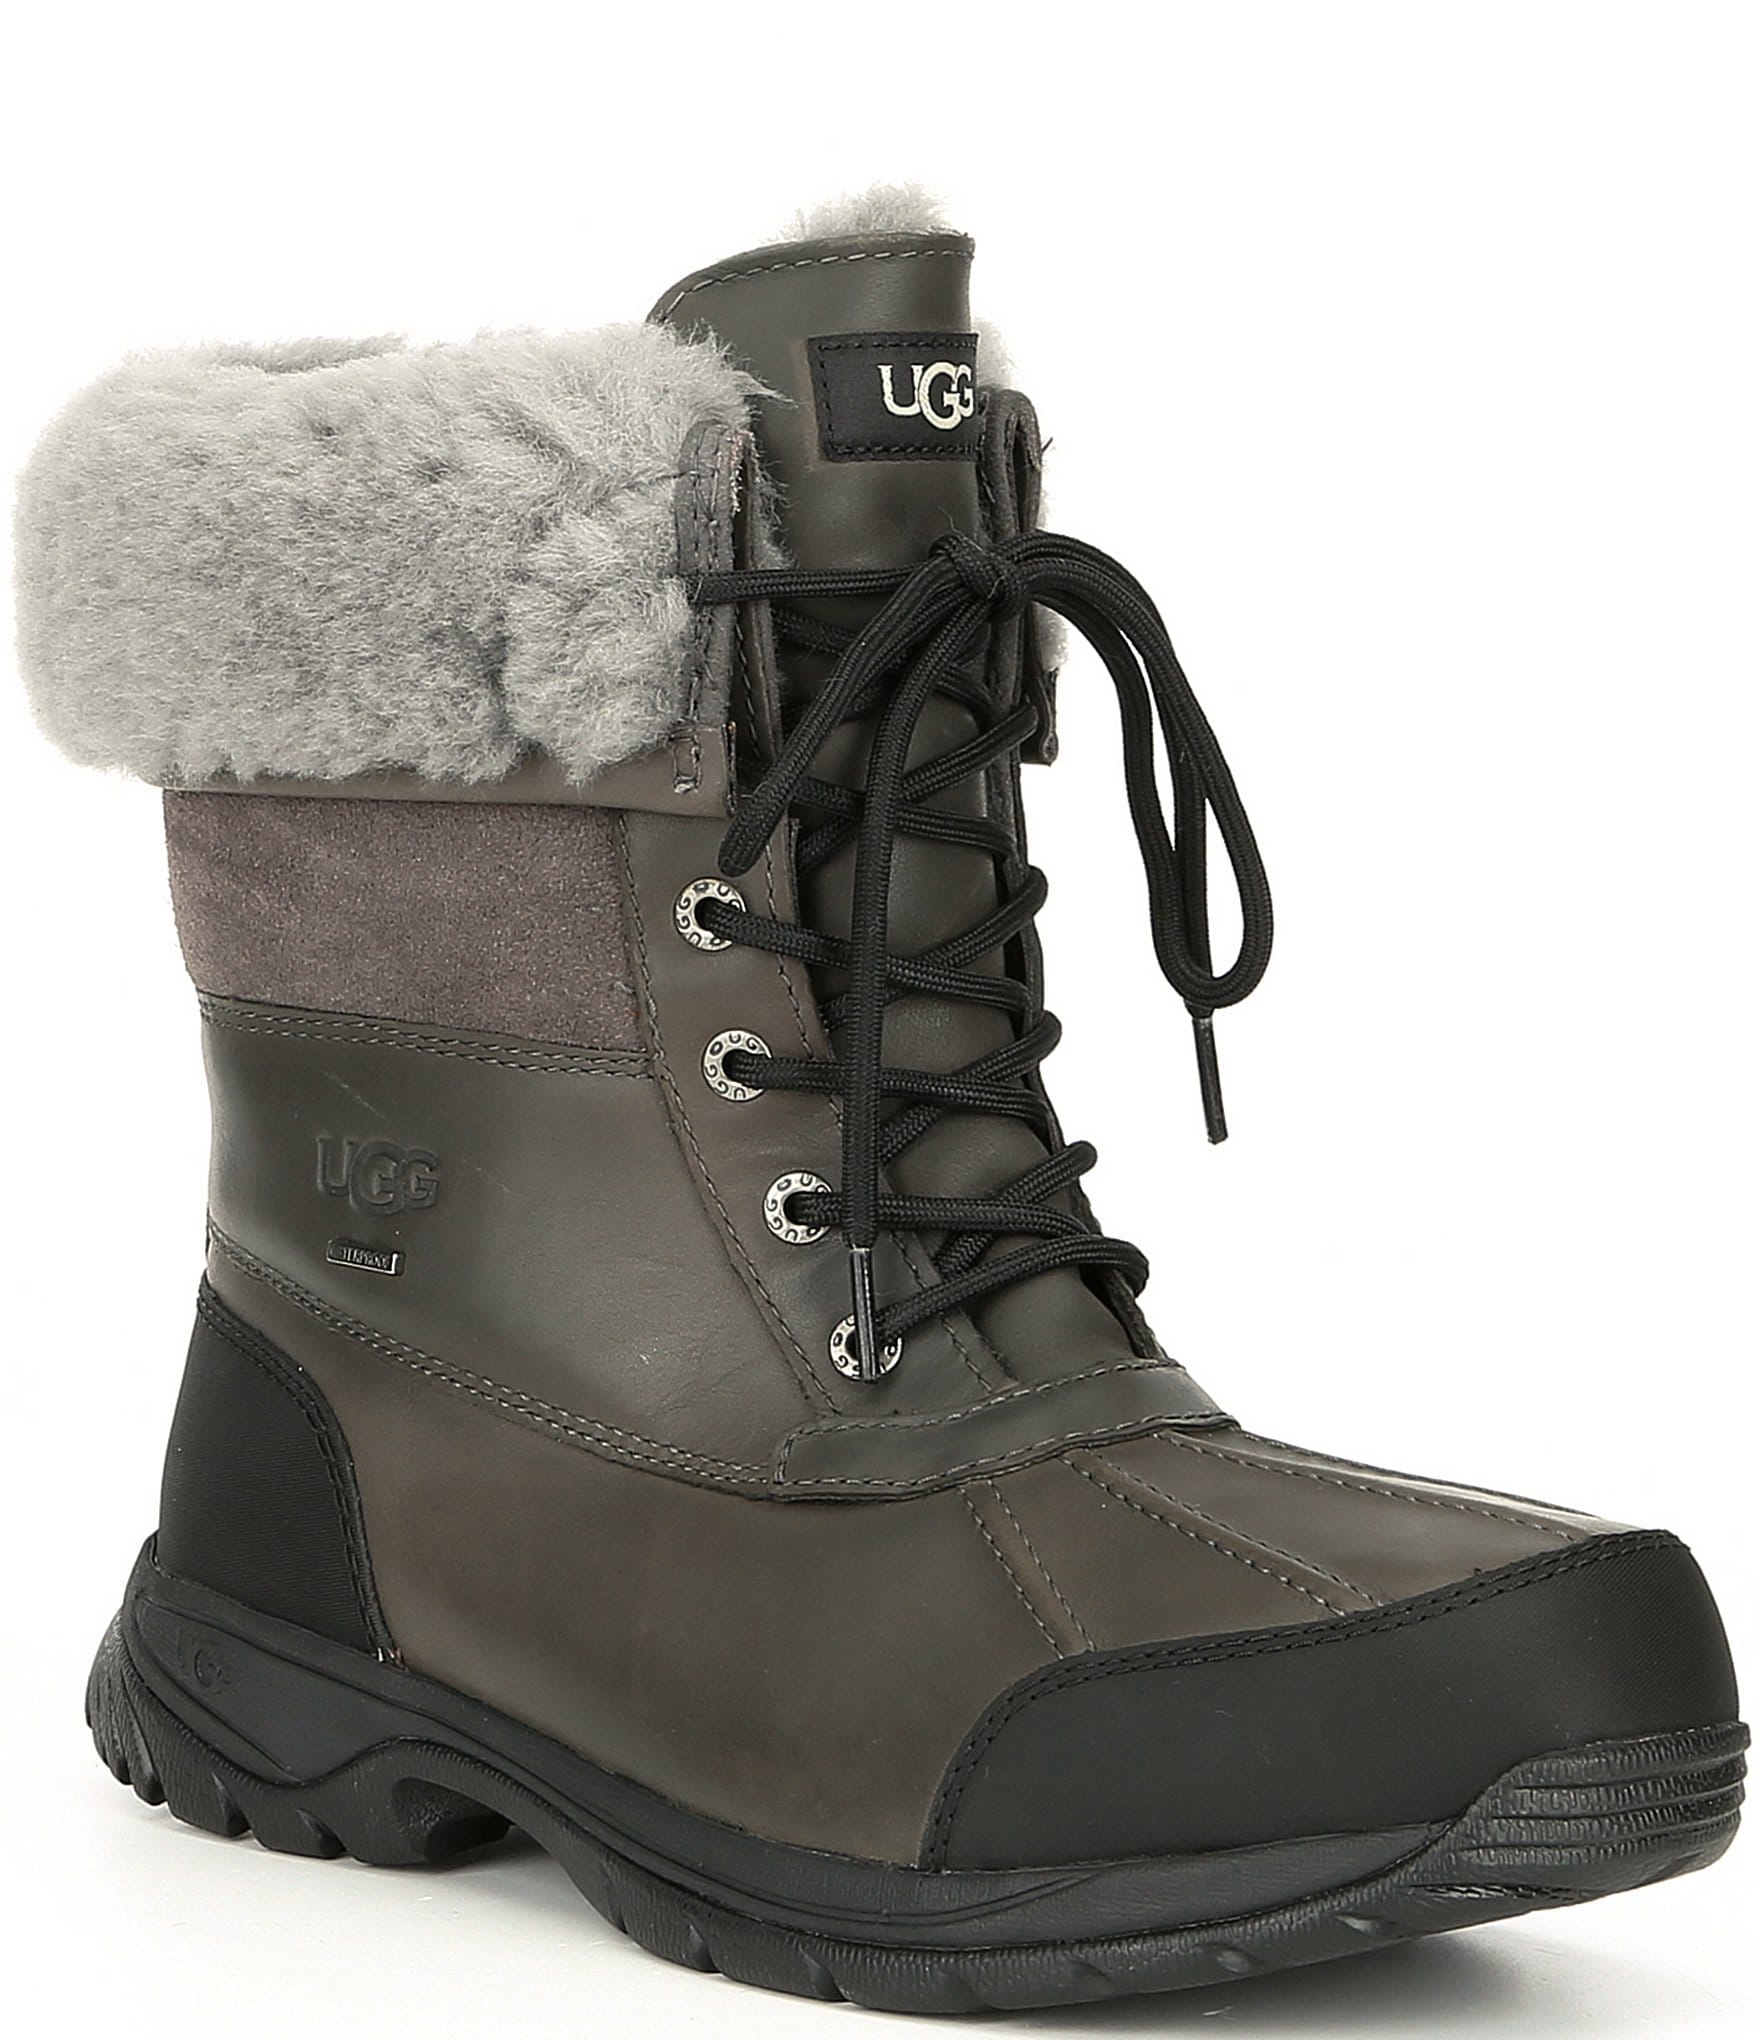 UGG® Men's Butte Waterproof Leather Cold Weather Boots | Dillard's